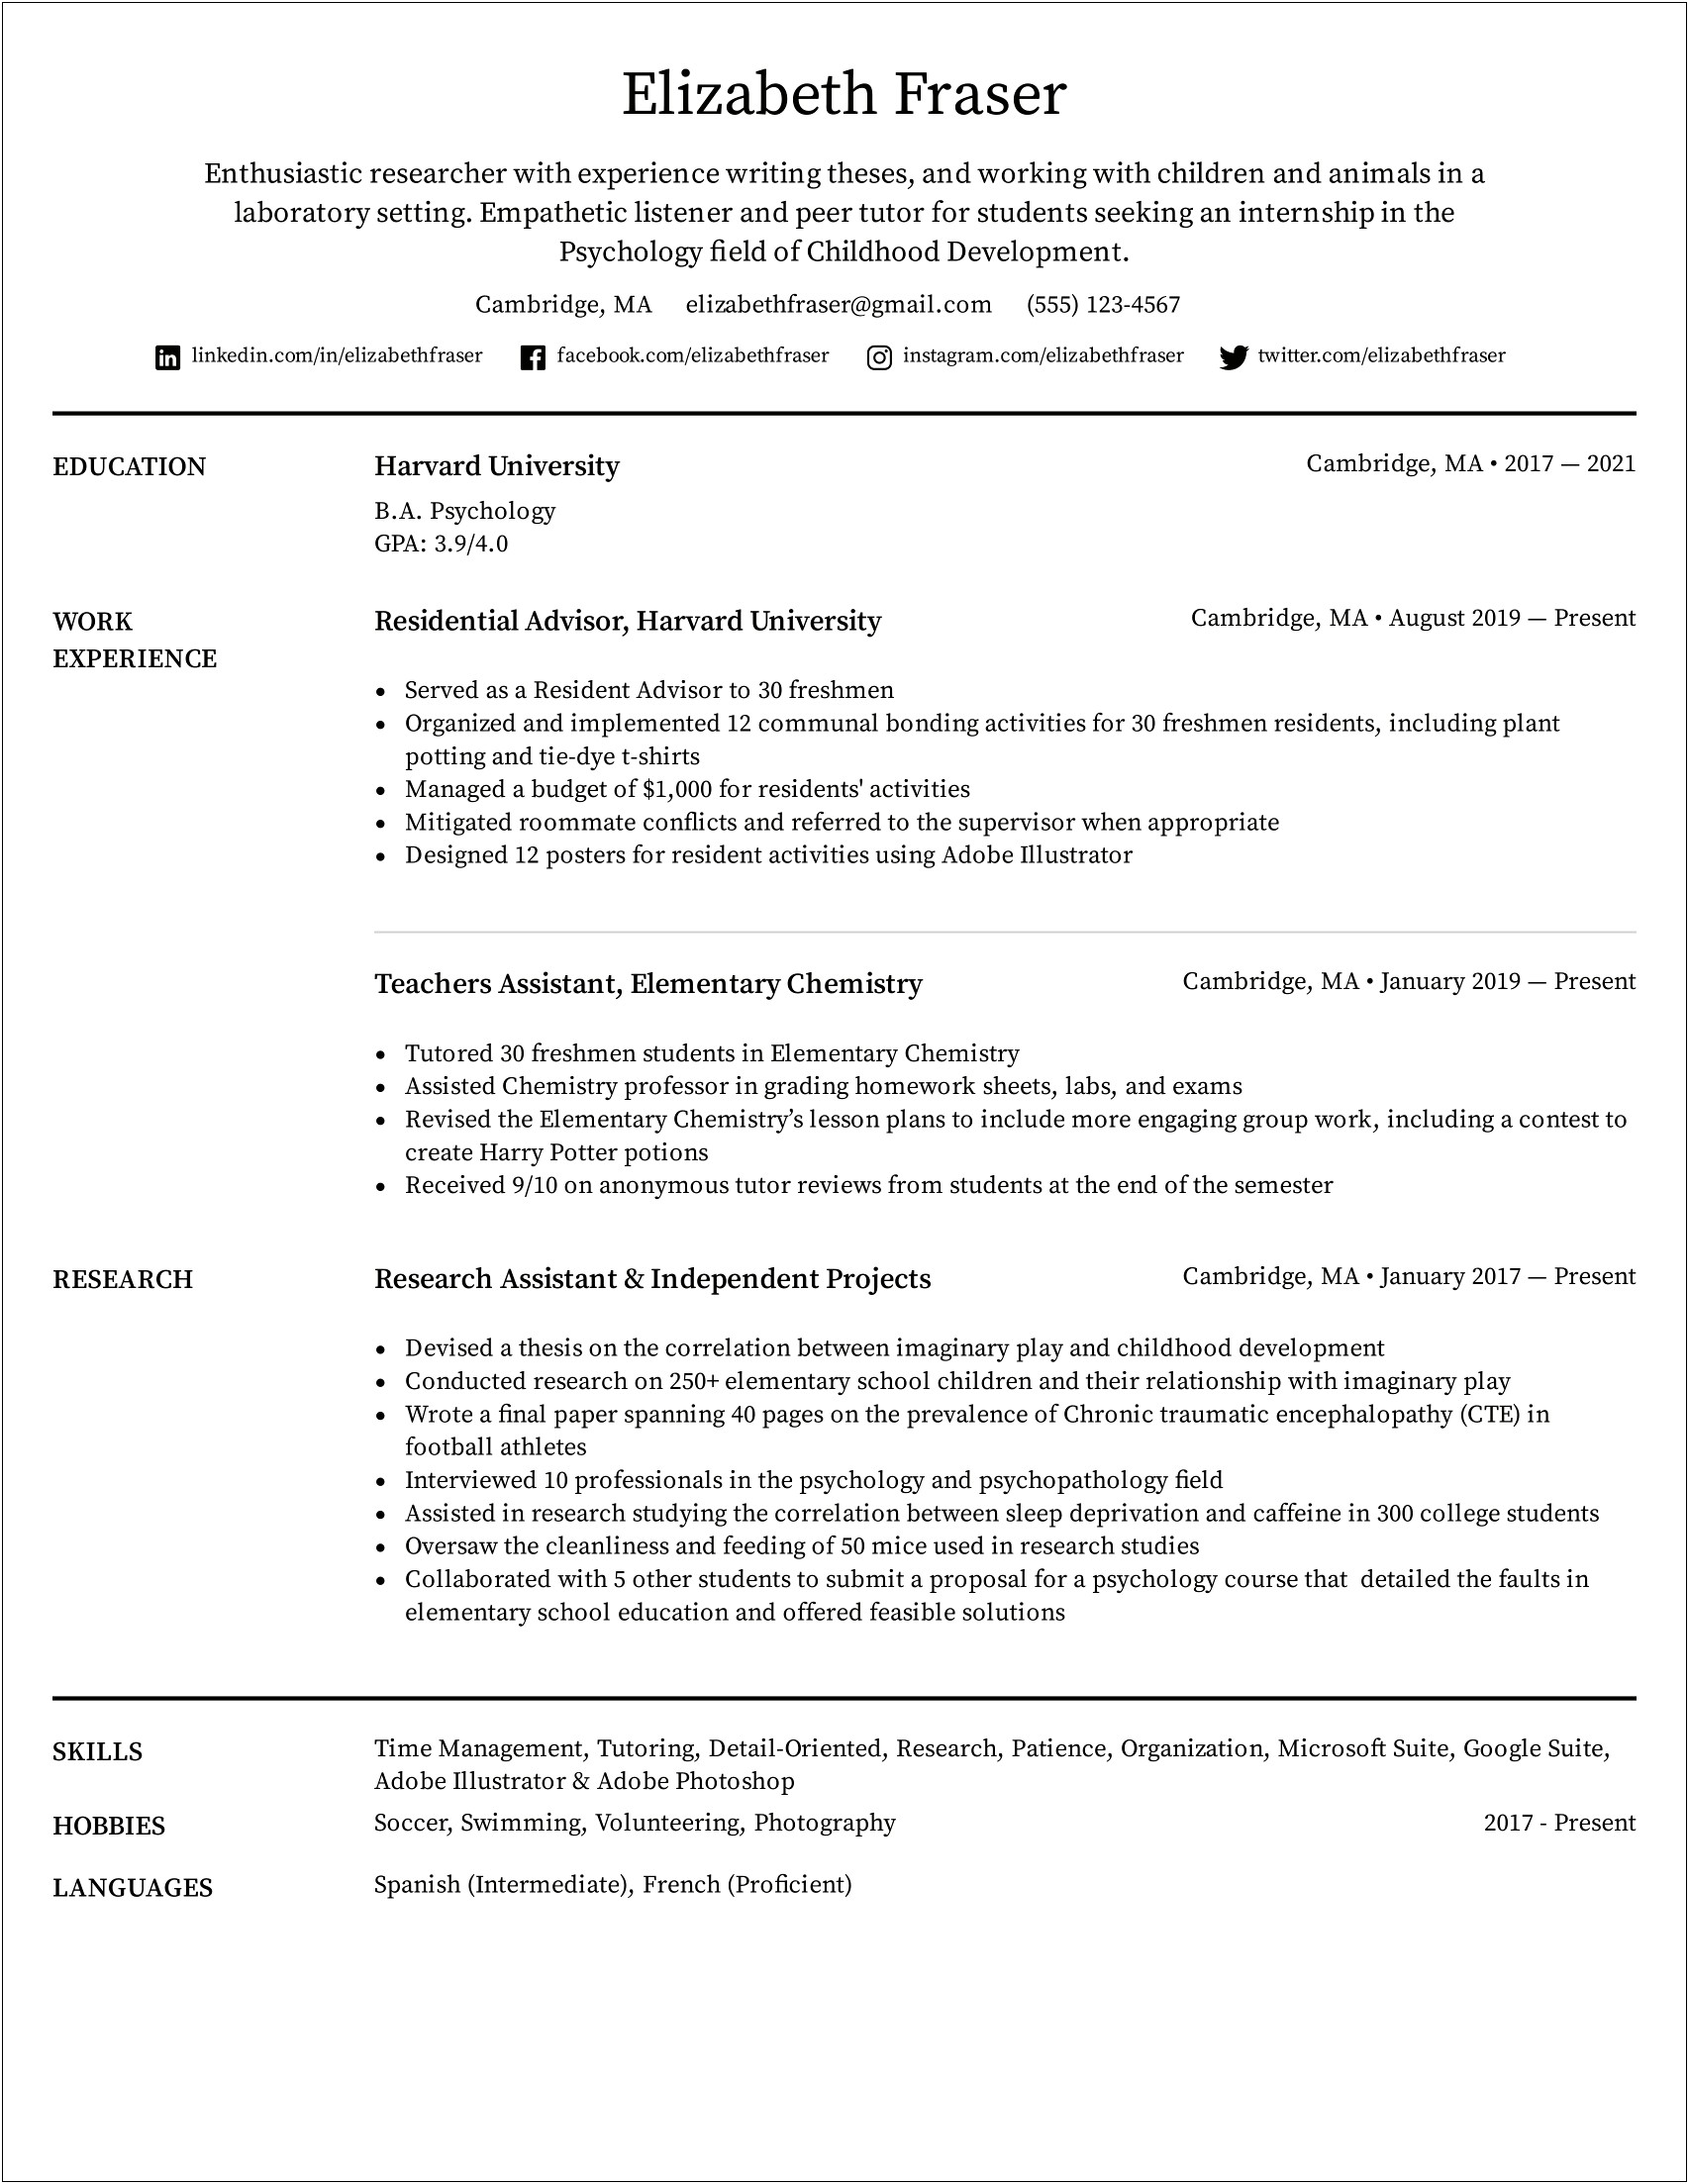 Resume Examples For Treasurer For A Club